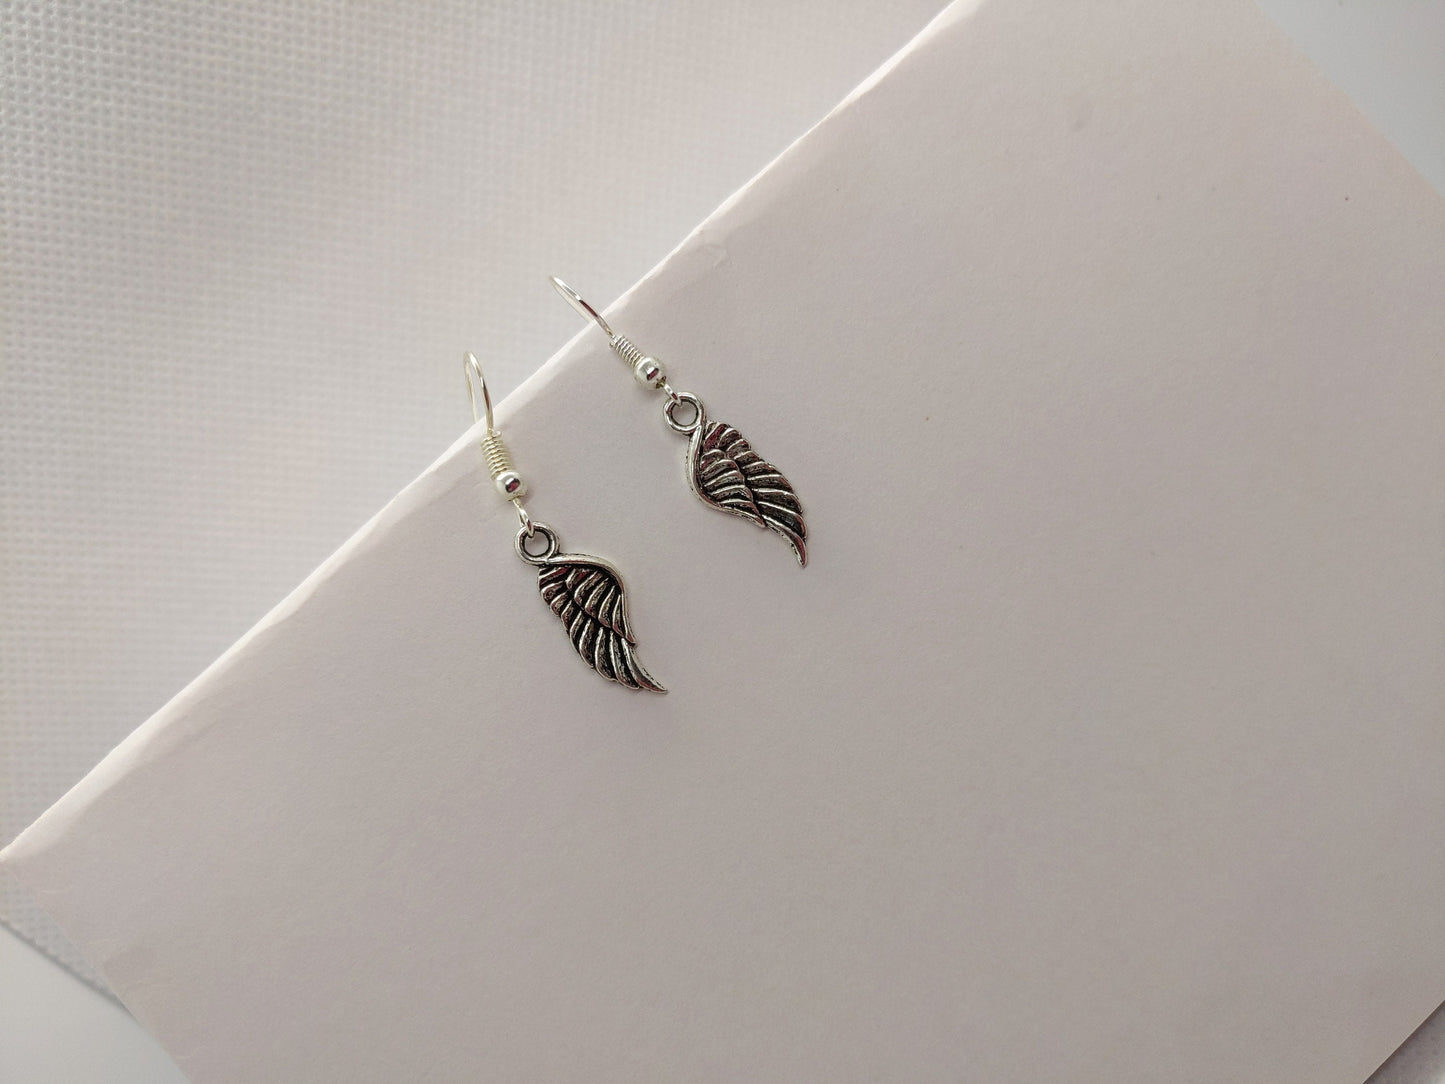 Angel earrings/silver plated/sterling silver/spiritual drops/wings/gifts for her/guardian angel/angelic jewellery/protection/gift for her